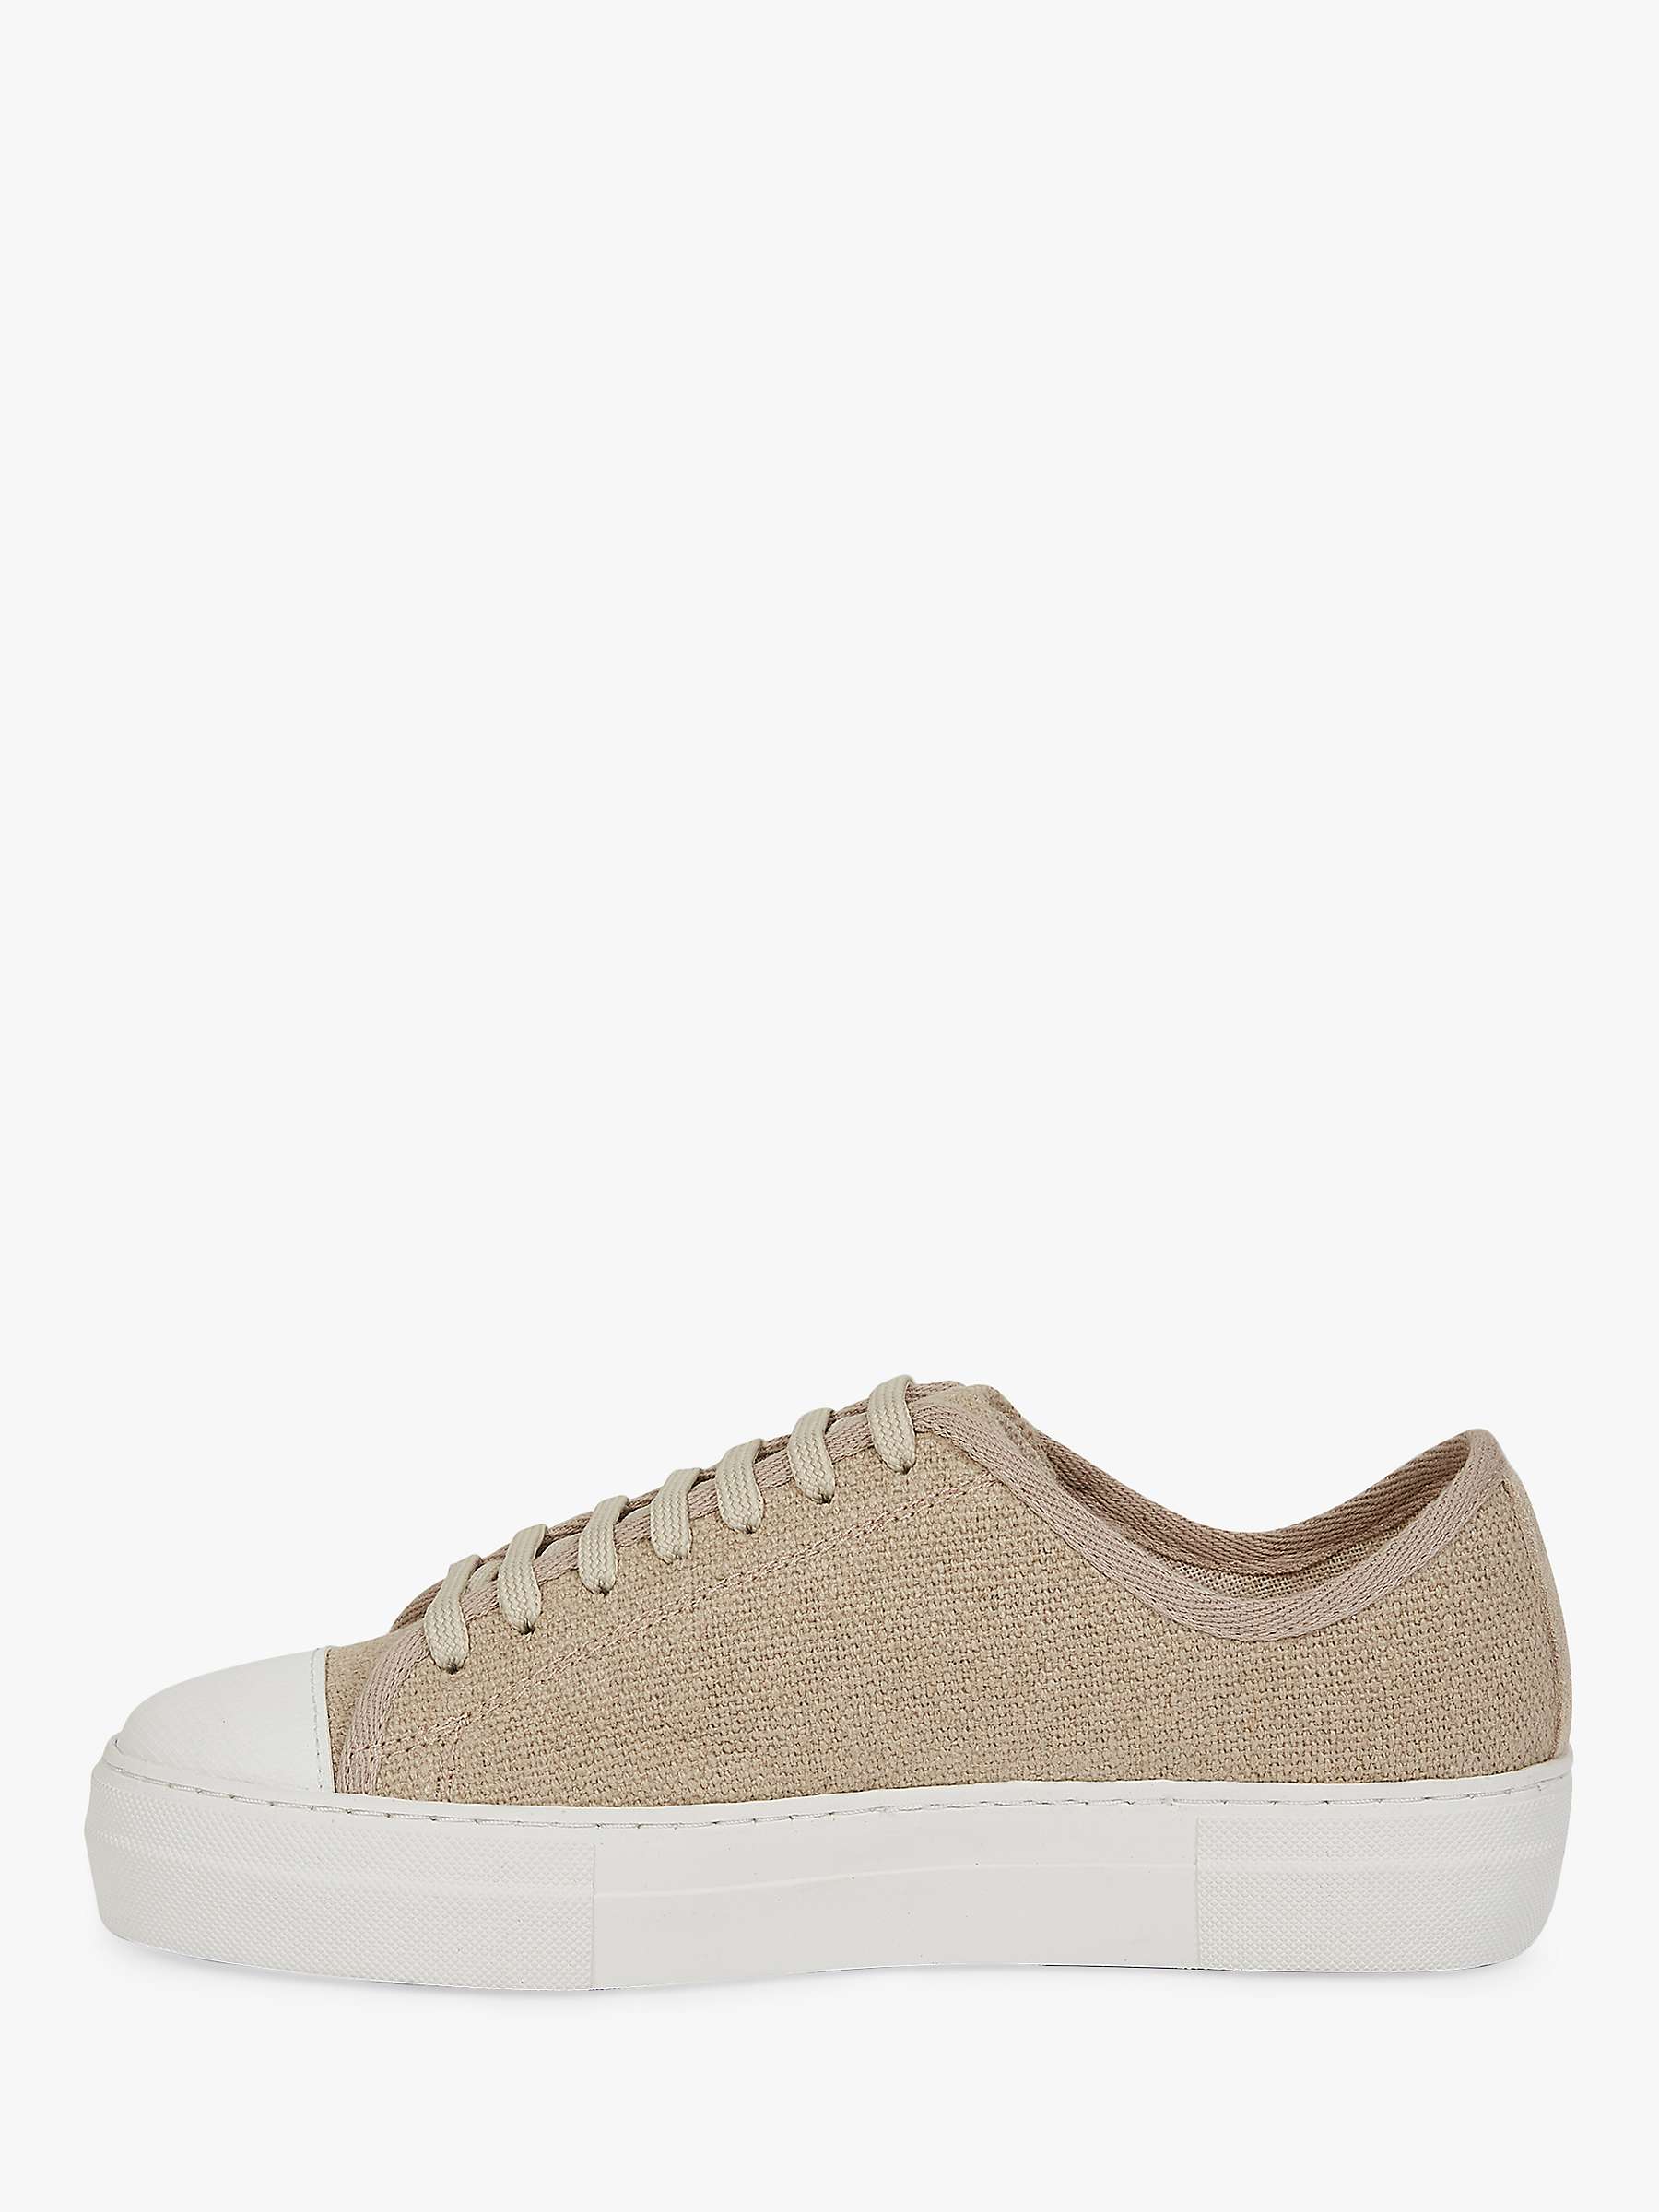 Buy Celtic & Co. Canvas Low Top Trainers Online at johnlewis.com